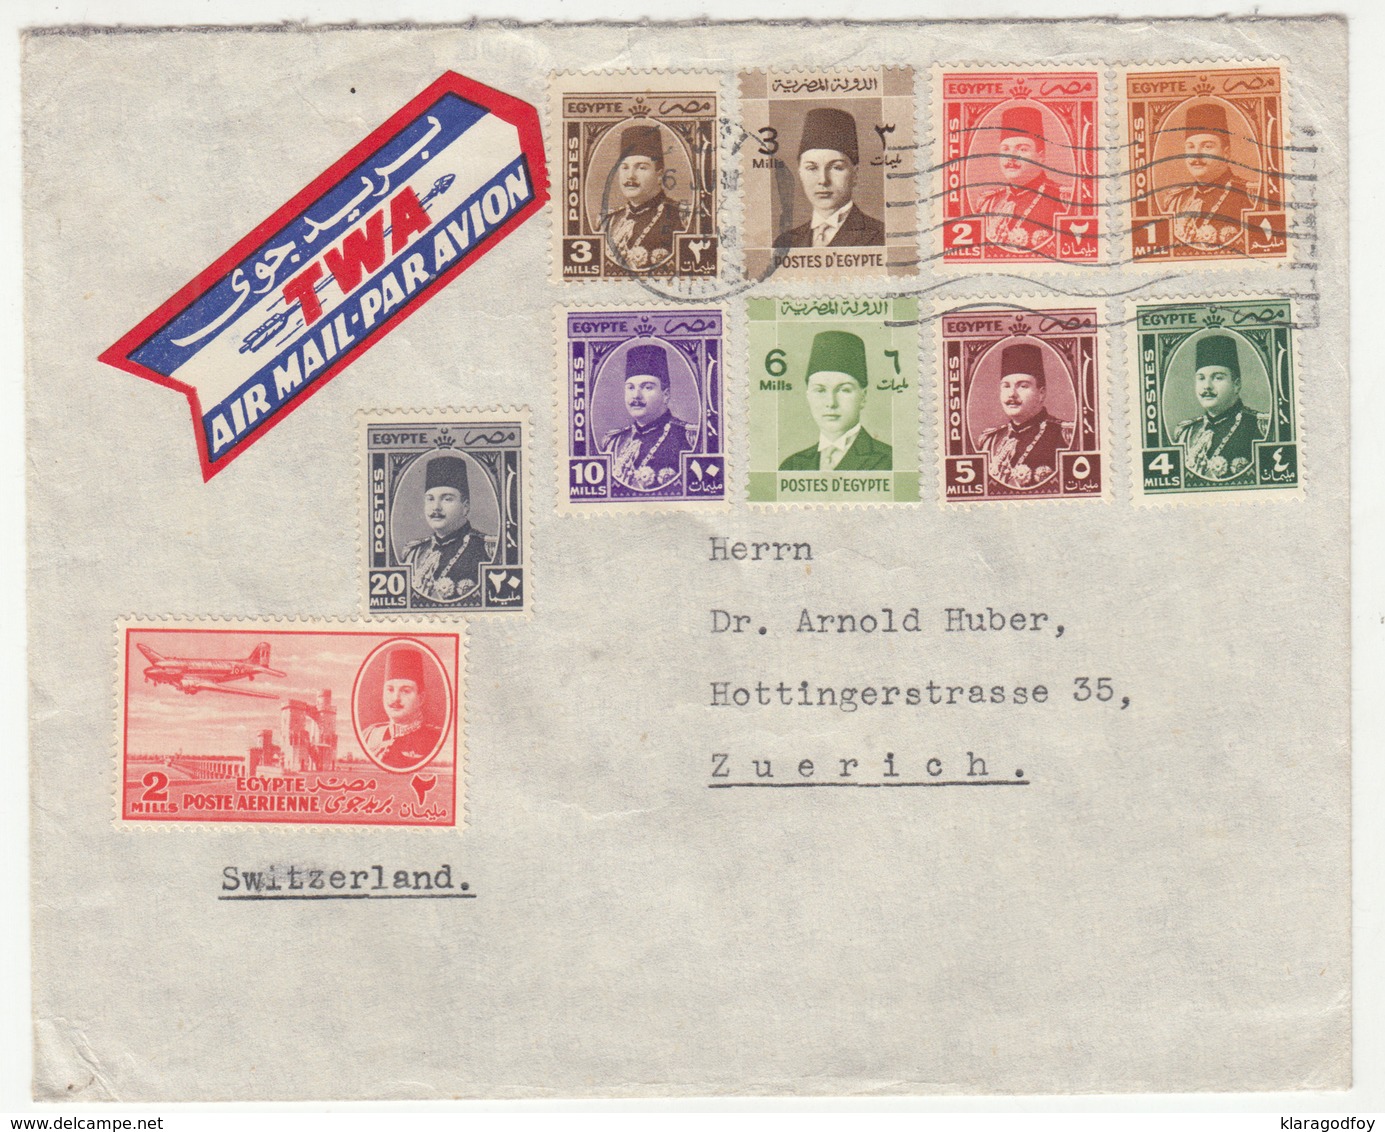 Egypt Letter Cover Travelled Air Mail TWA 194? To Switzerland B181010 - Covers & Documents